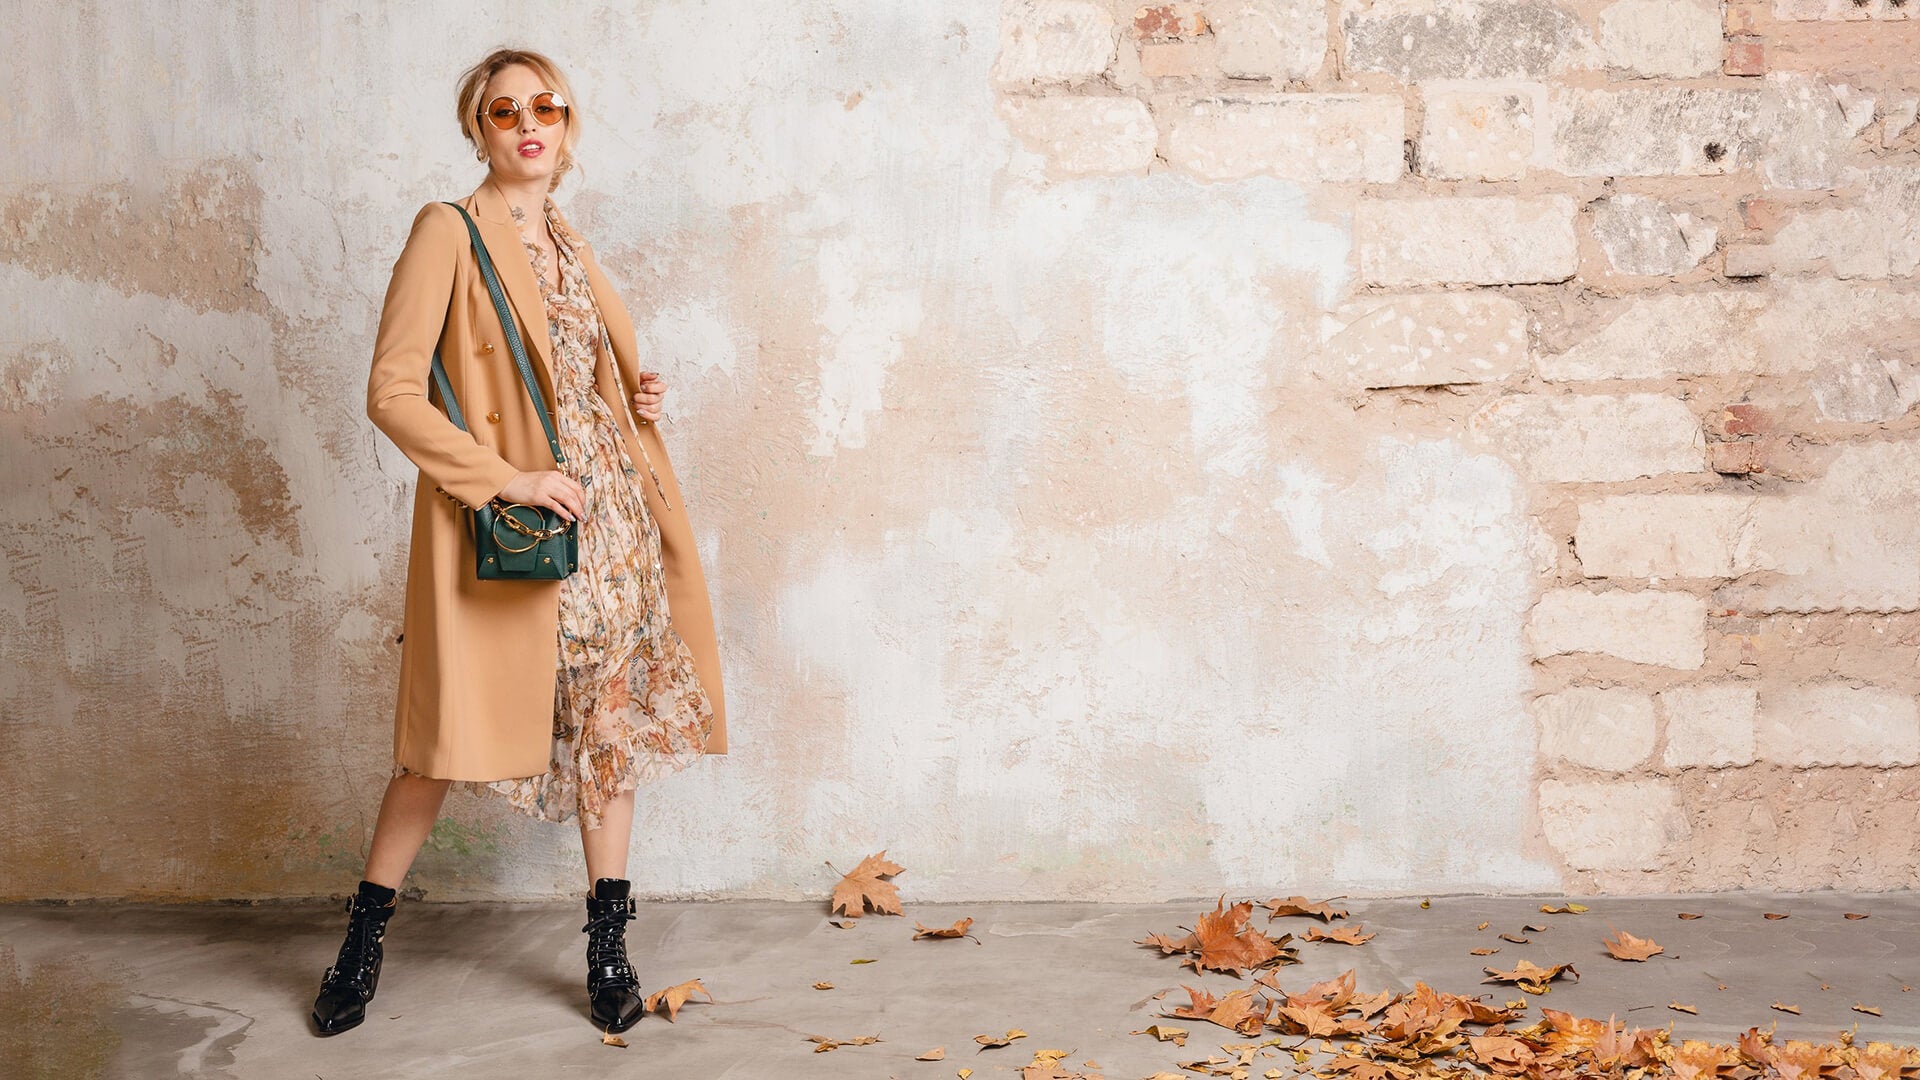 Autumn Fashion Essentials: What to Wear This Fall